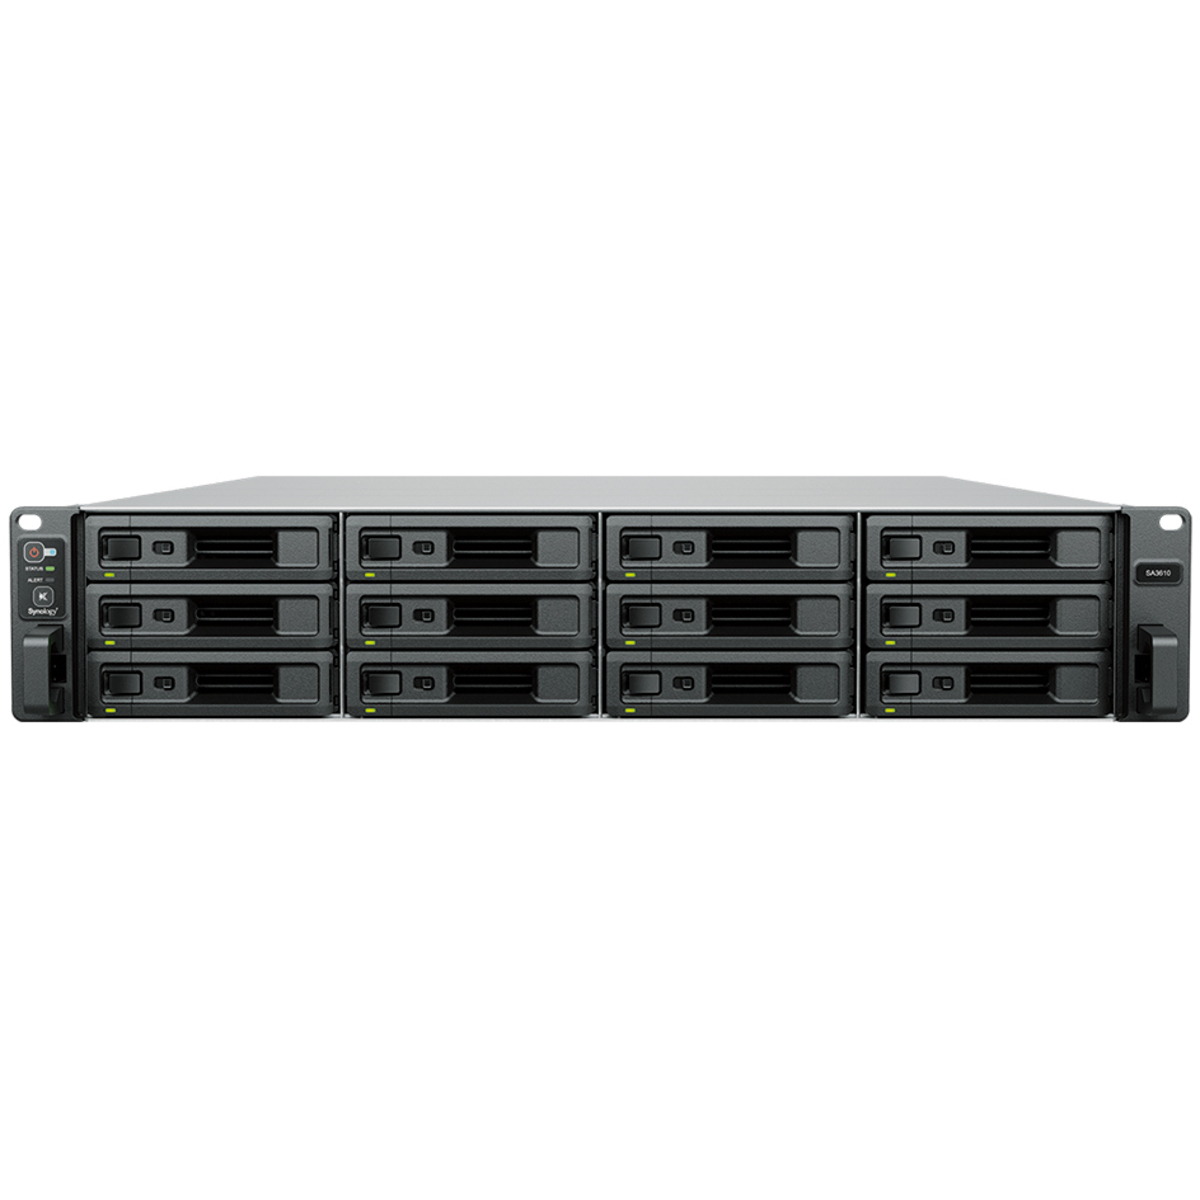 Synology RackStation SA3410 48tb 12-Bay RackMount Large Business / Enterprise NAS - Network Attached Storage Device 12x4tb Samsung 870 QVO MZ-77Q4T0 2.5 560/530MB/s SATA 6Gb/s SSD CONSUMER Class Drives Installed - Burn-In Tested RackStation SA3410